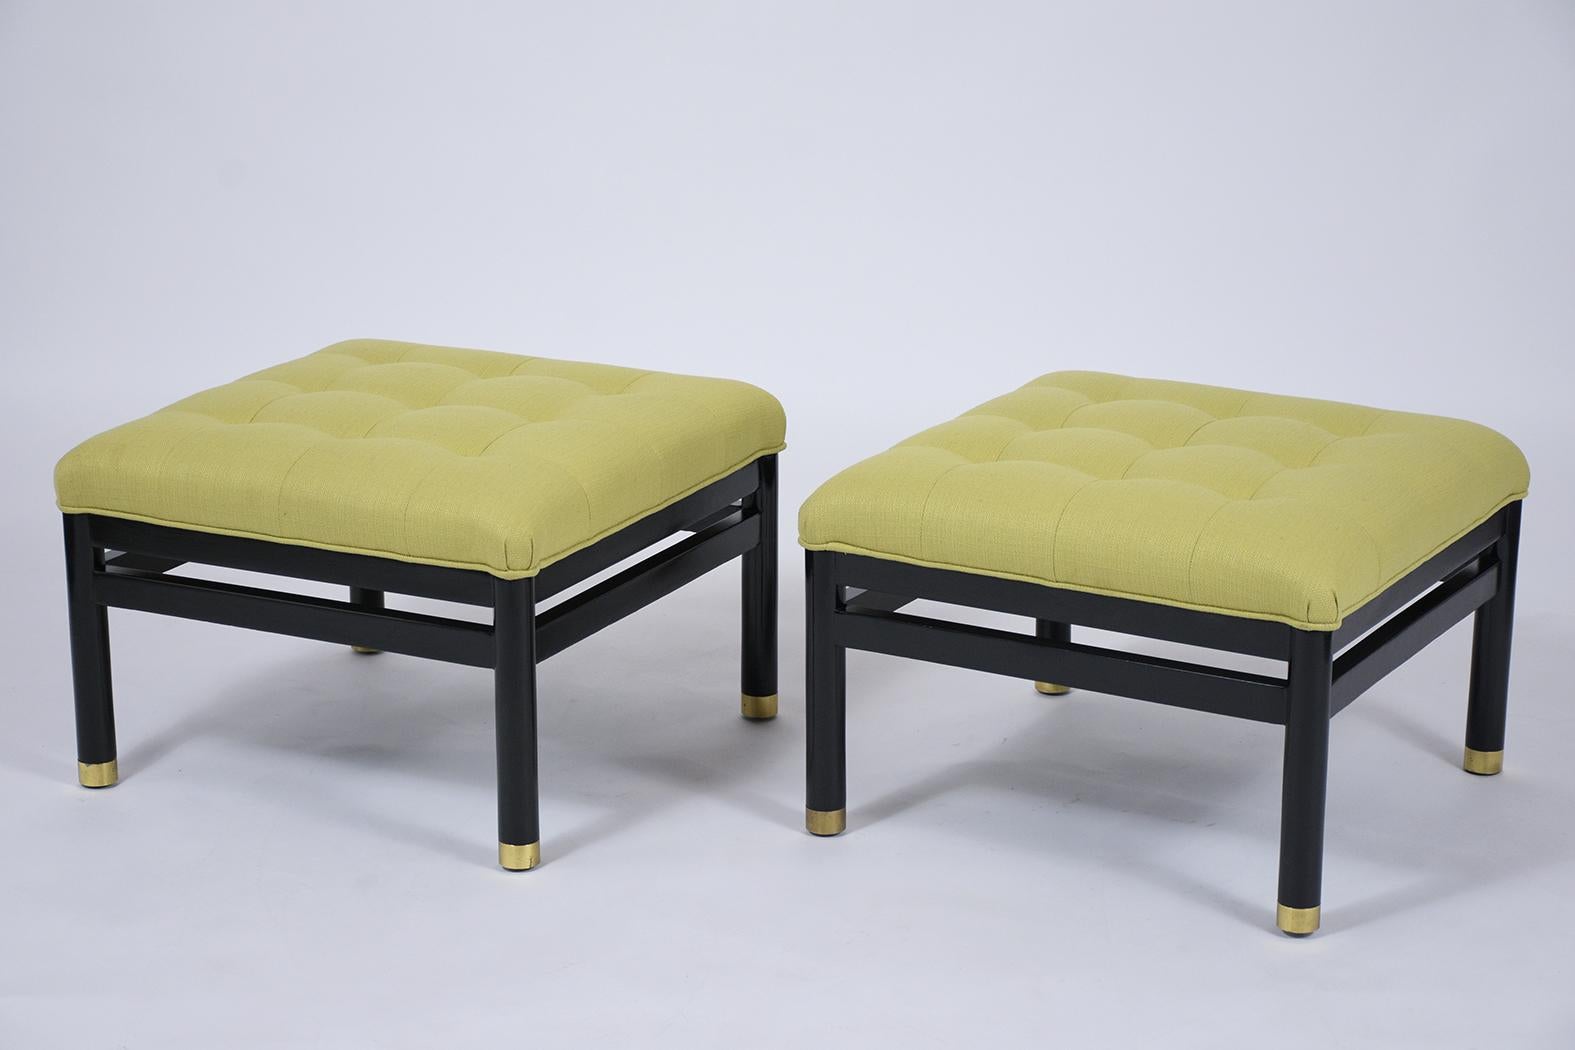 American Pair of Mid-Century Modern Upholstery Benches